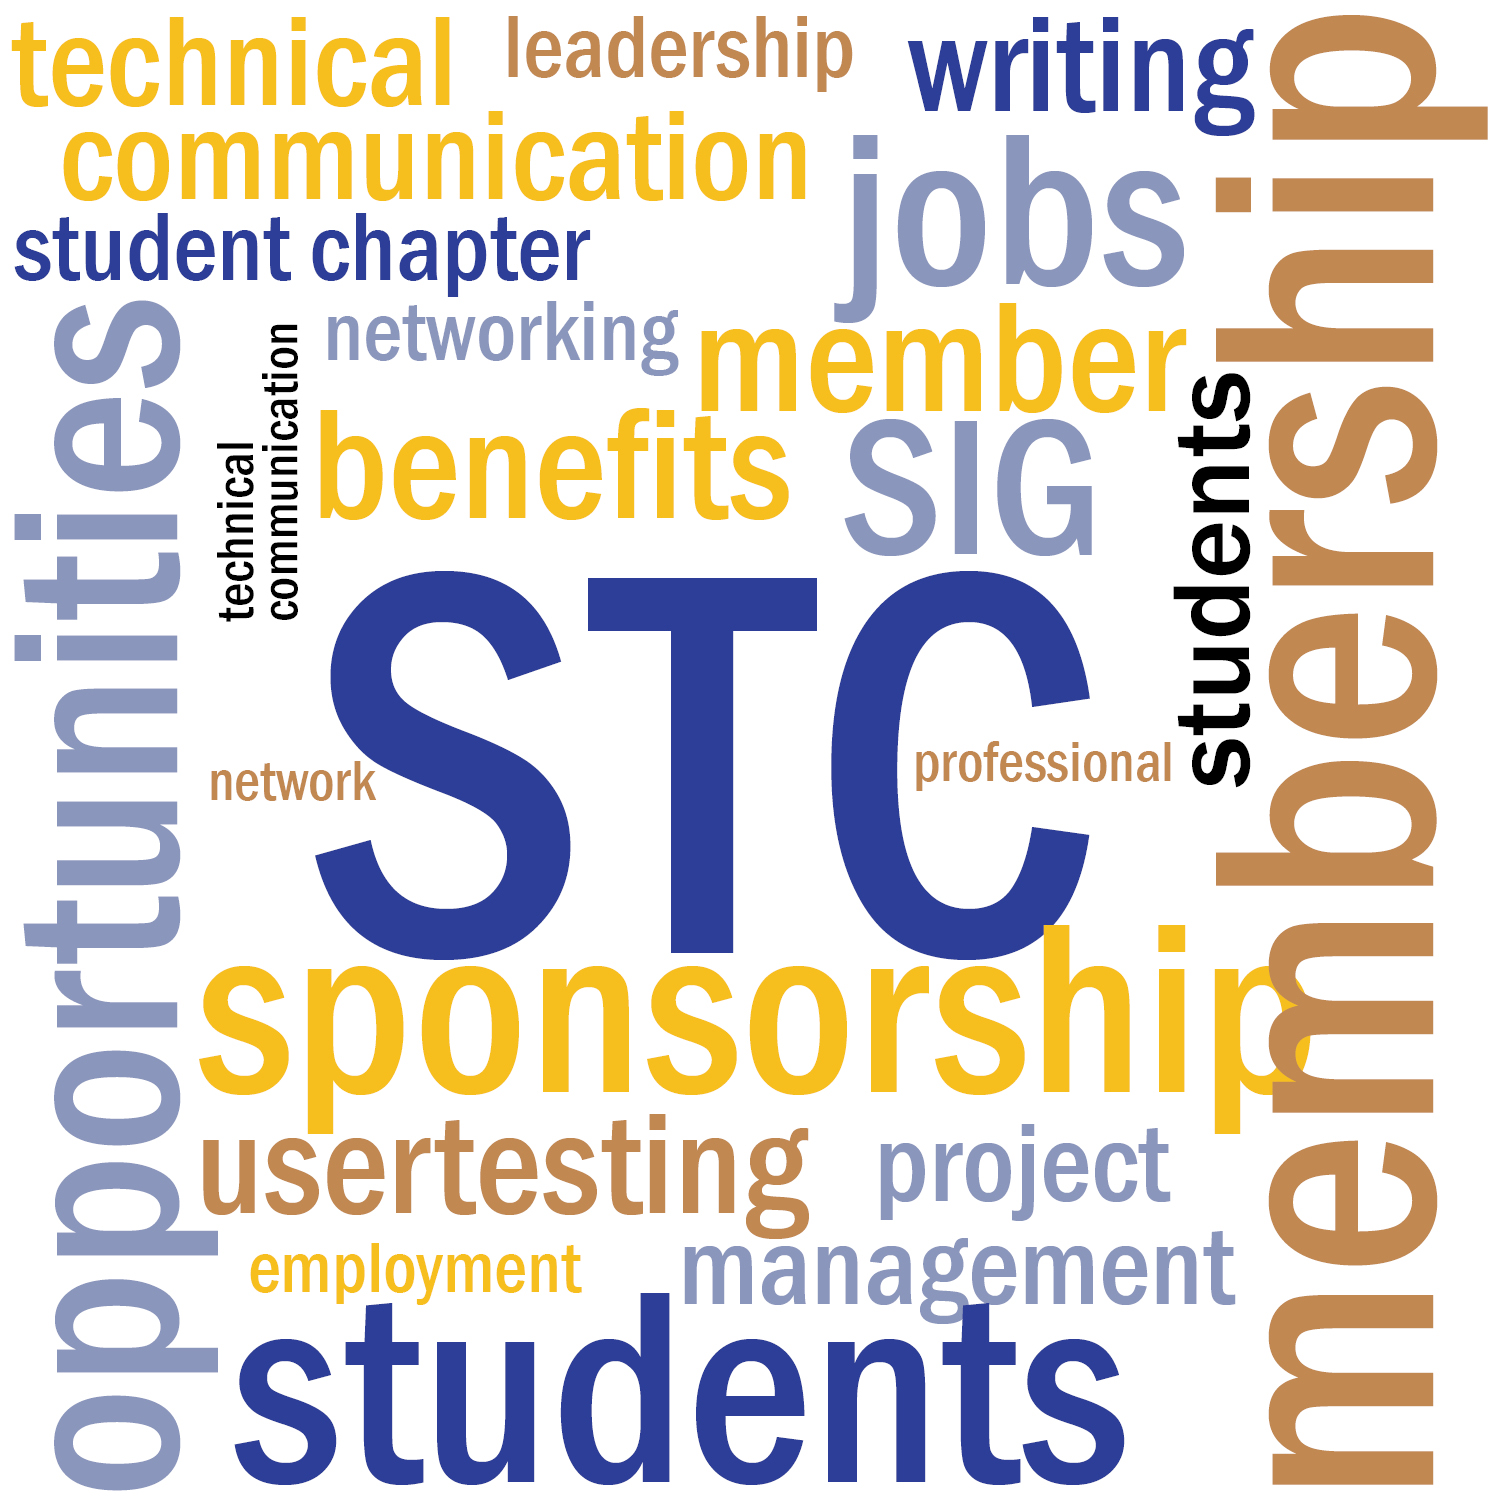 STC Canada West Coast chapter offers sponsorship of 10 student memberships